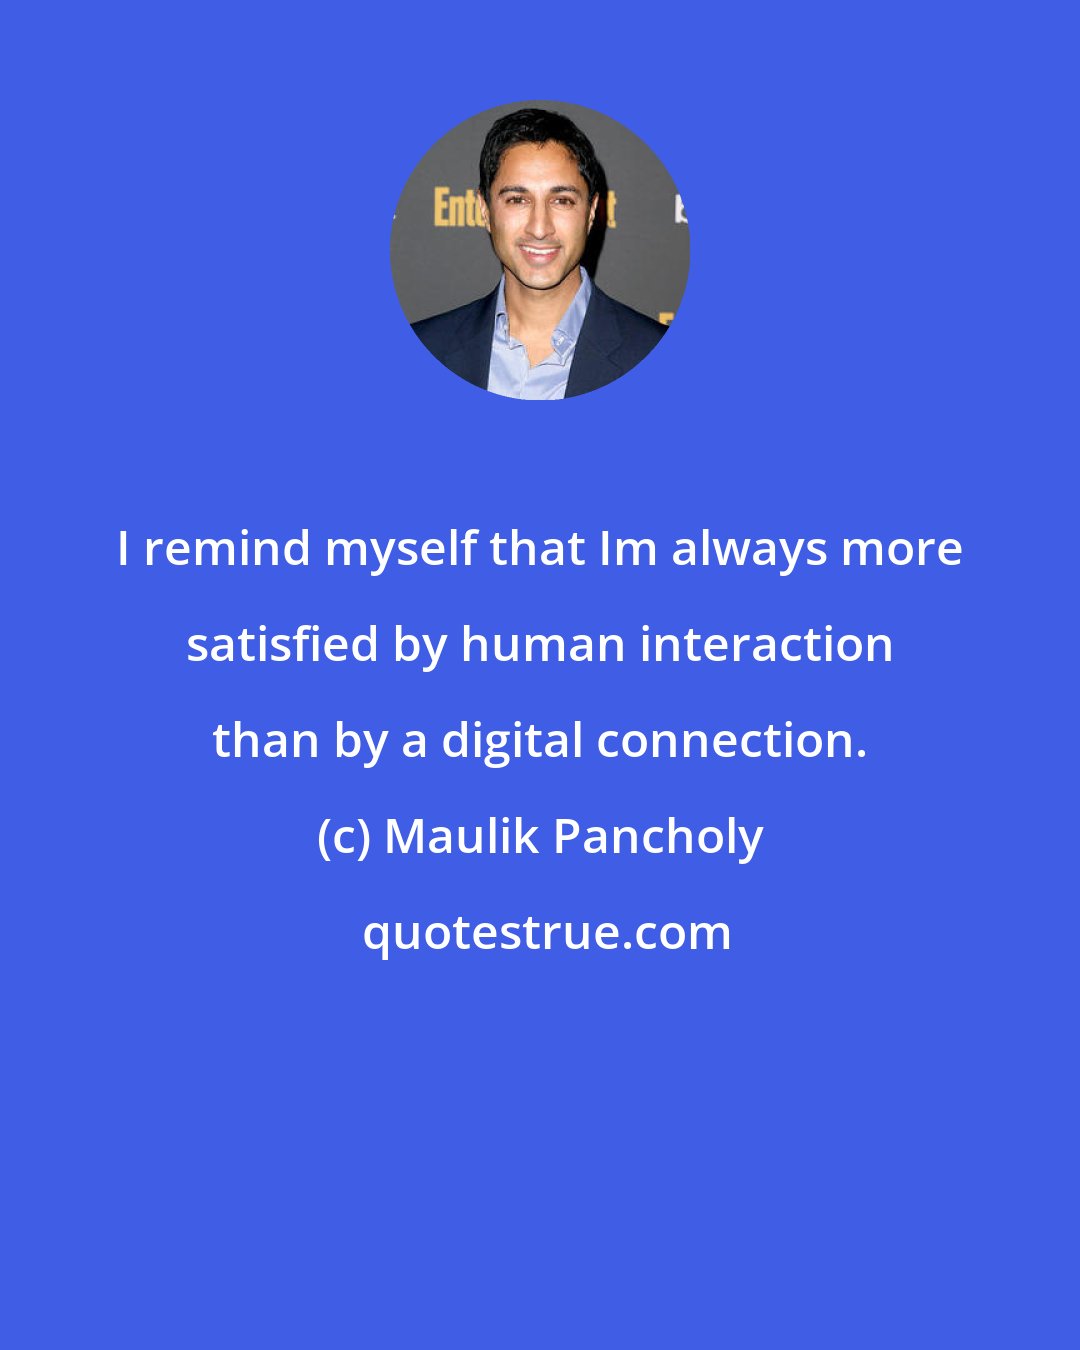 Maulik Pancholy: I remind myself that Im always more satisfied by human interaction than by a digital connection.